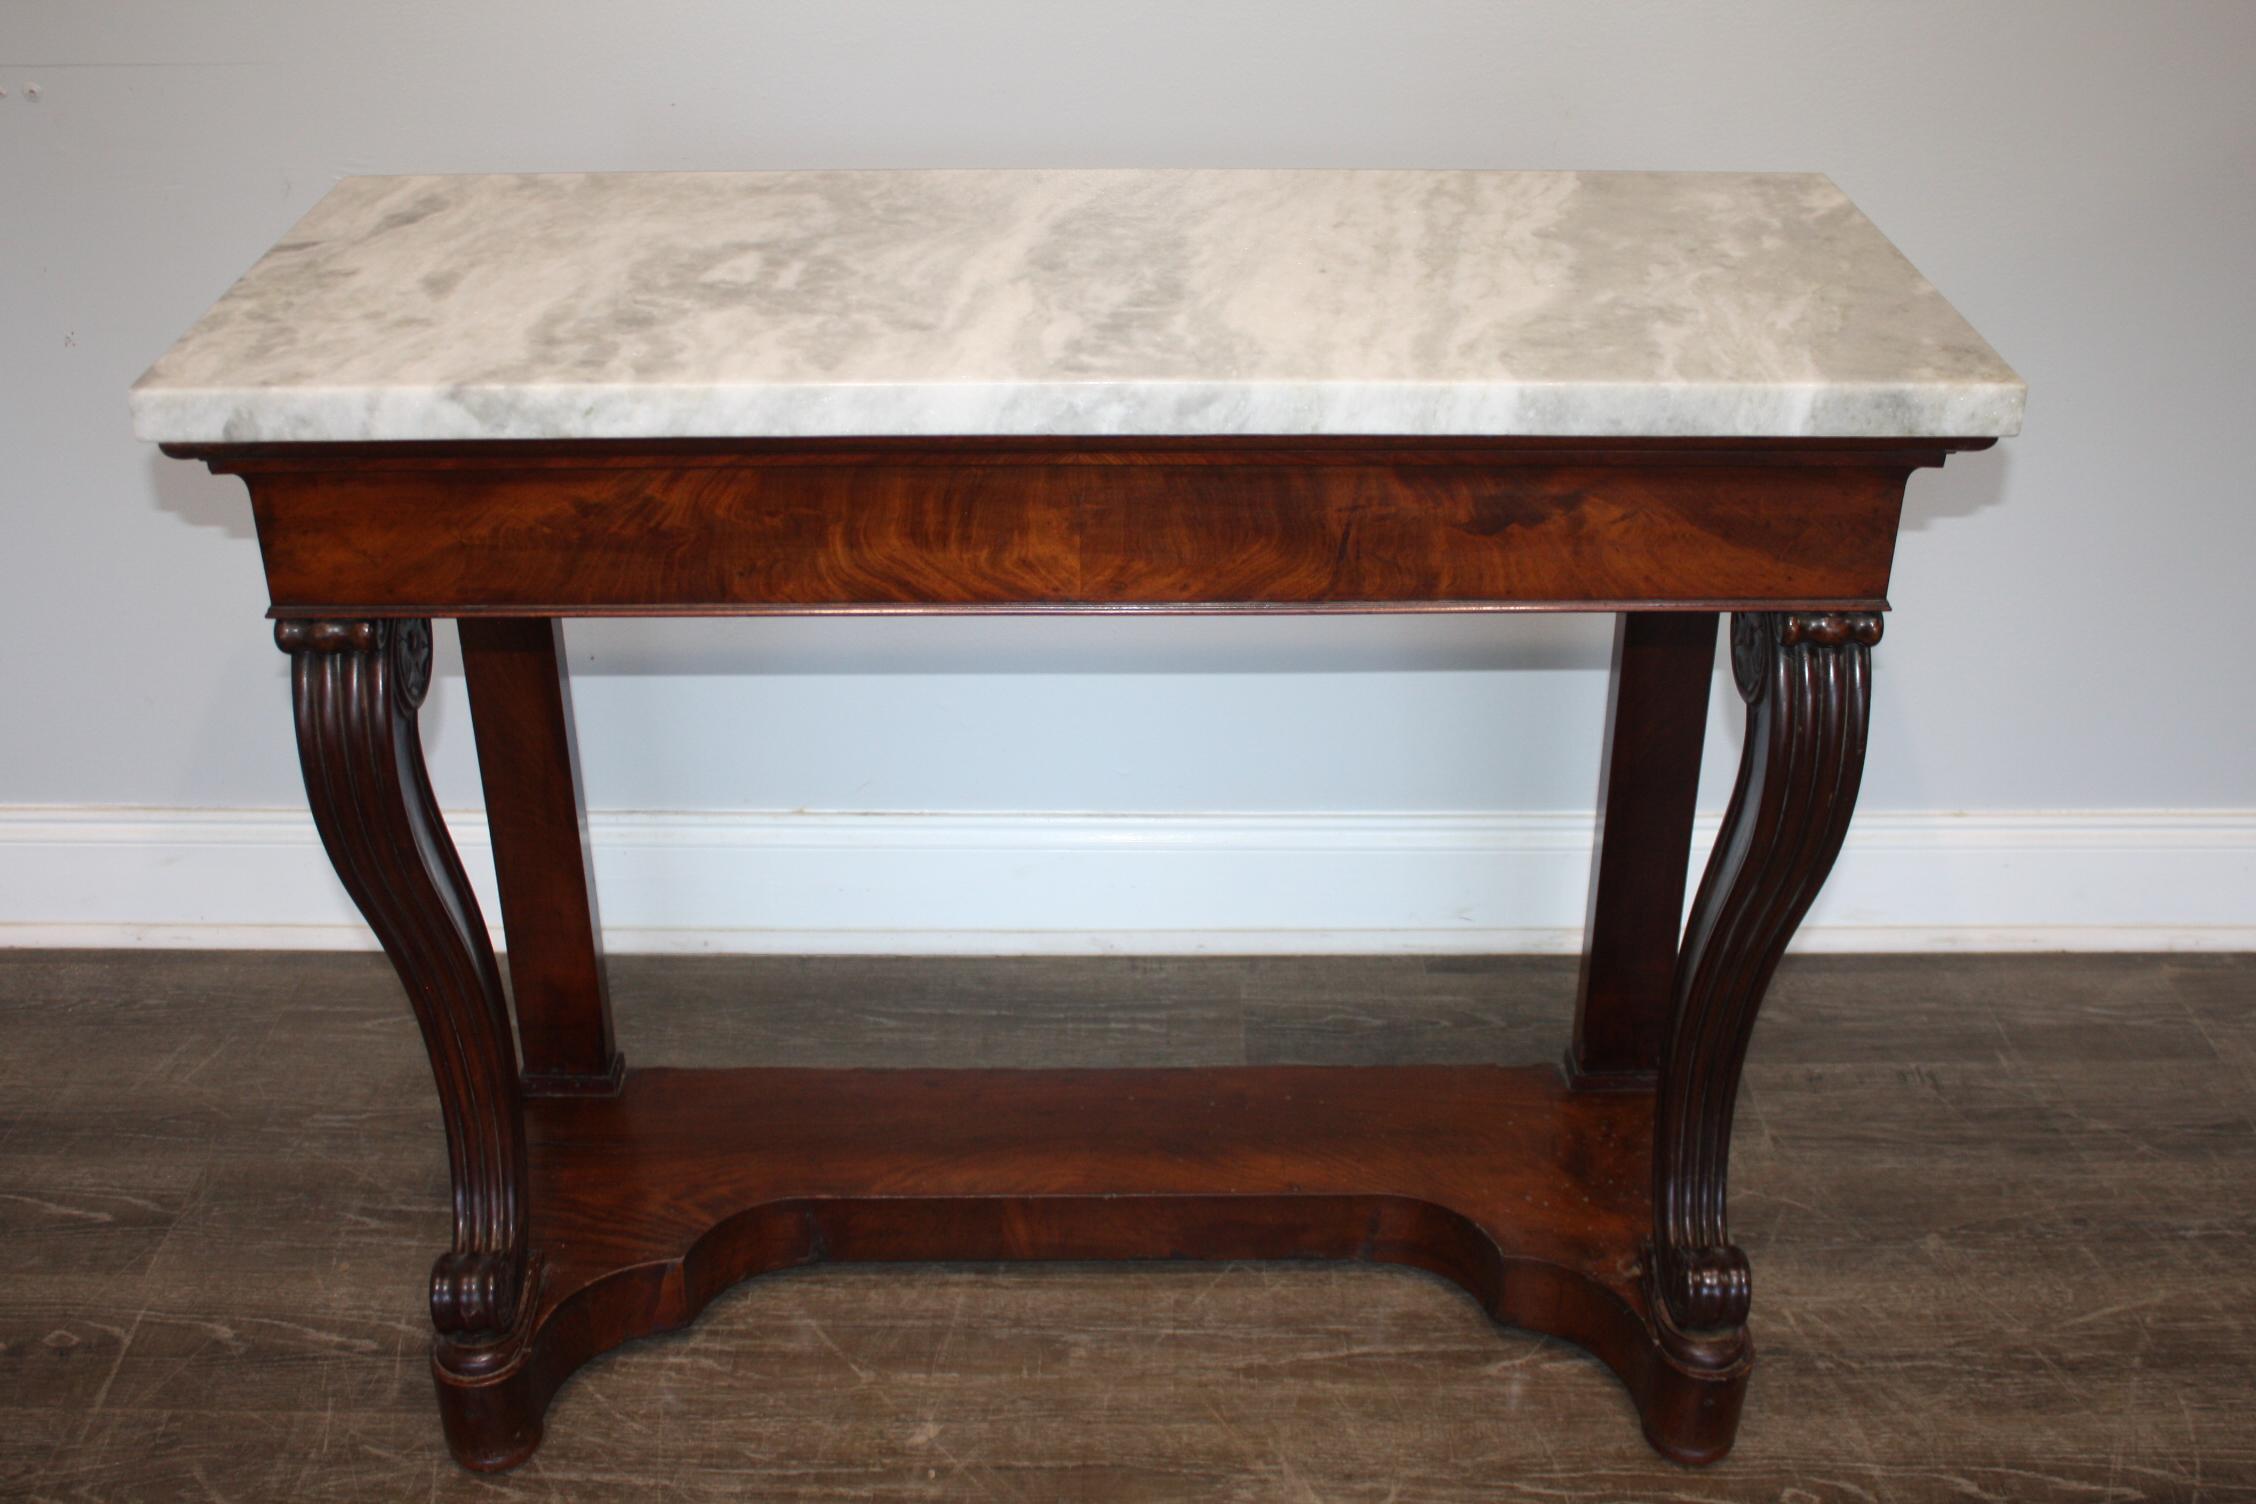 This console is made of flamed mahogany and a white marble with grey veines.